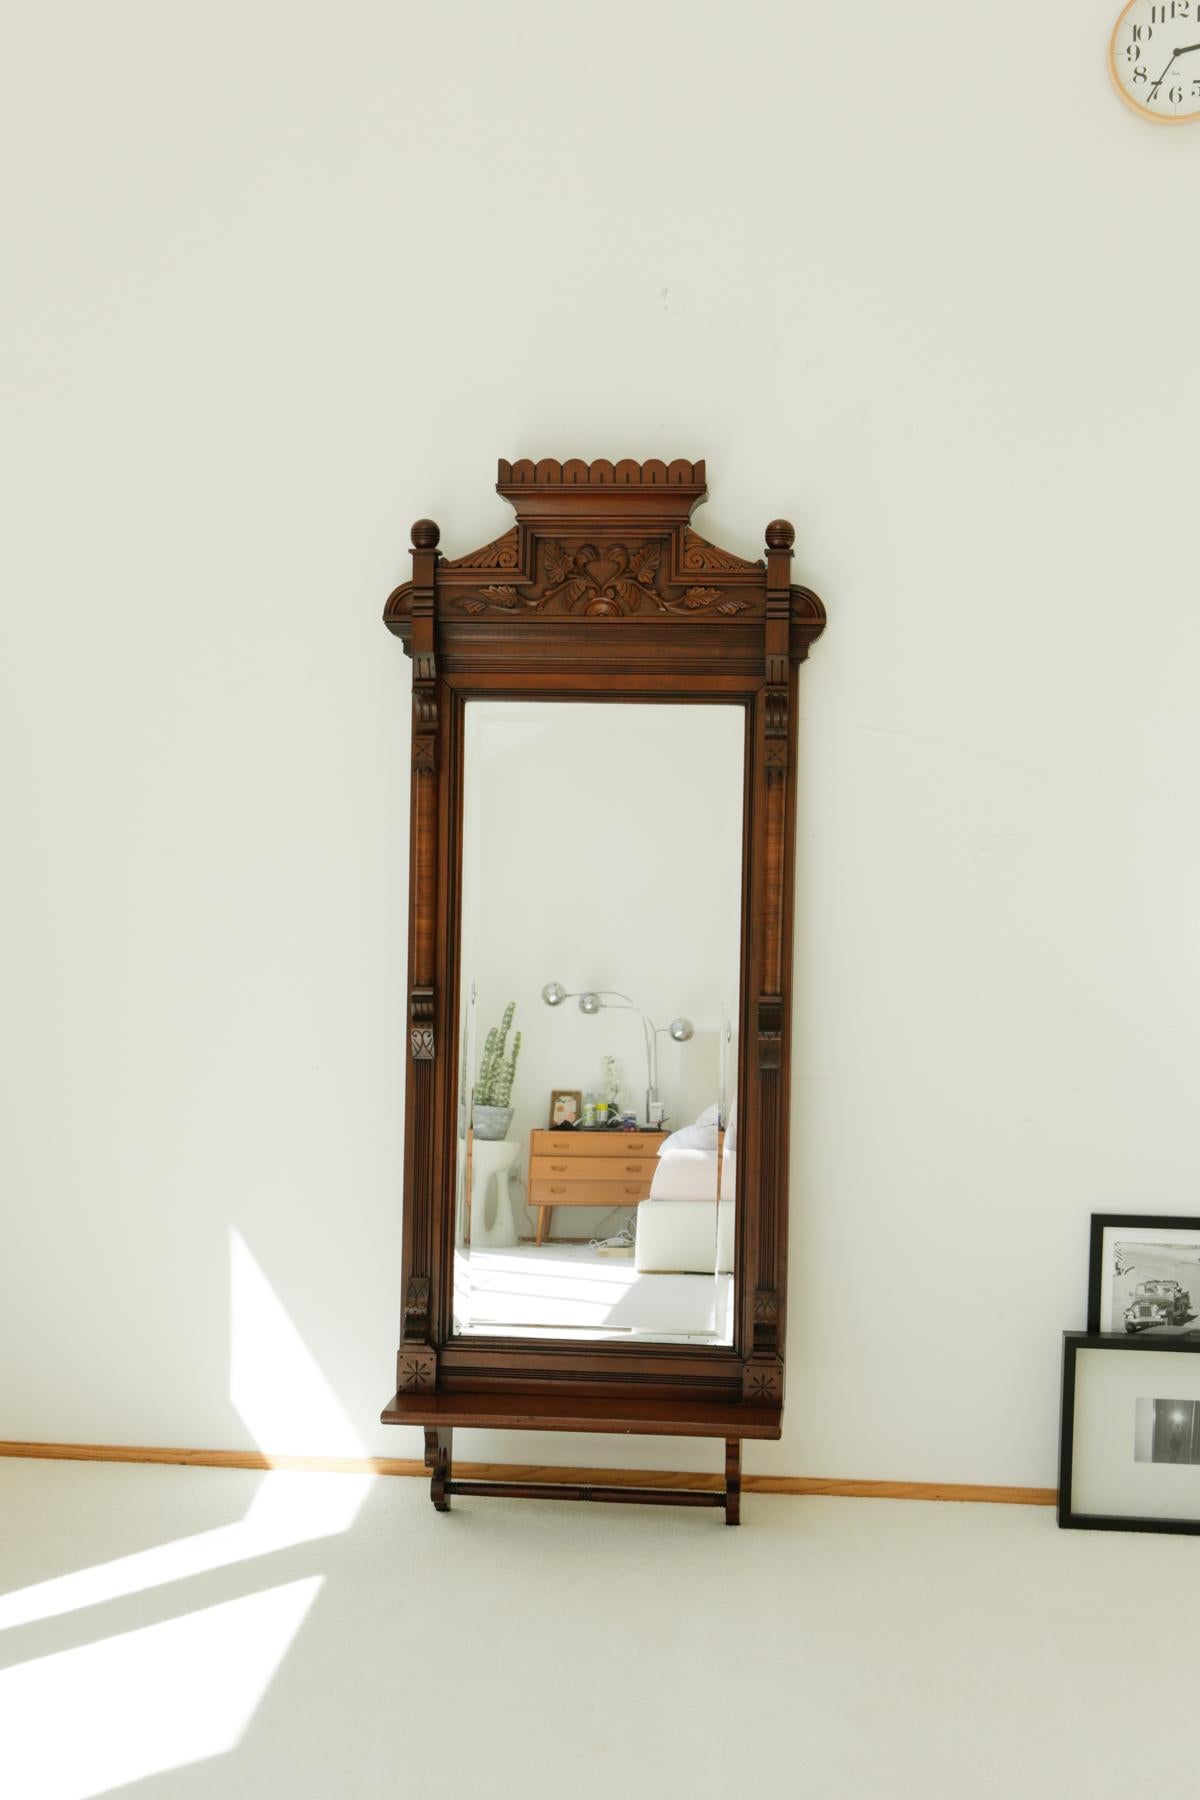 Circa 1820s Carved Solid Mahogany Wall Mirror with Shelf 6